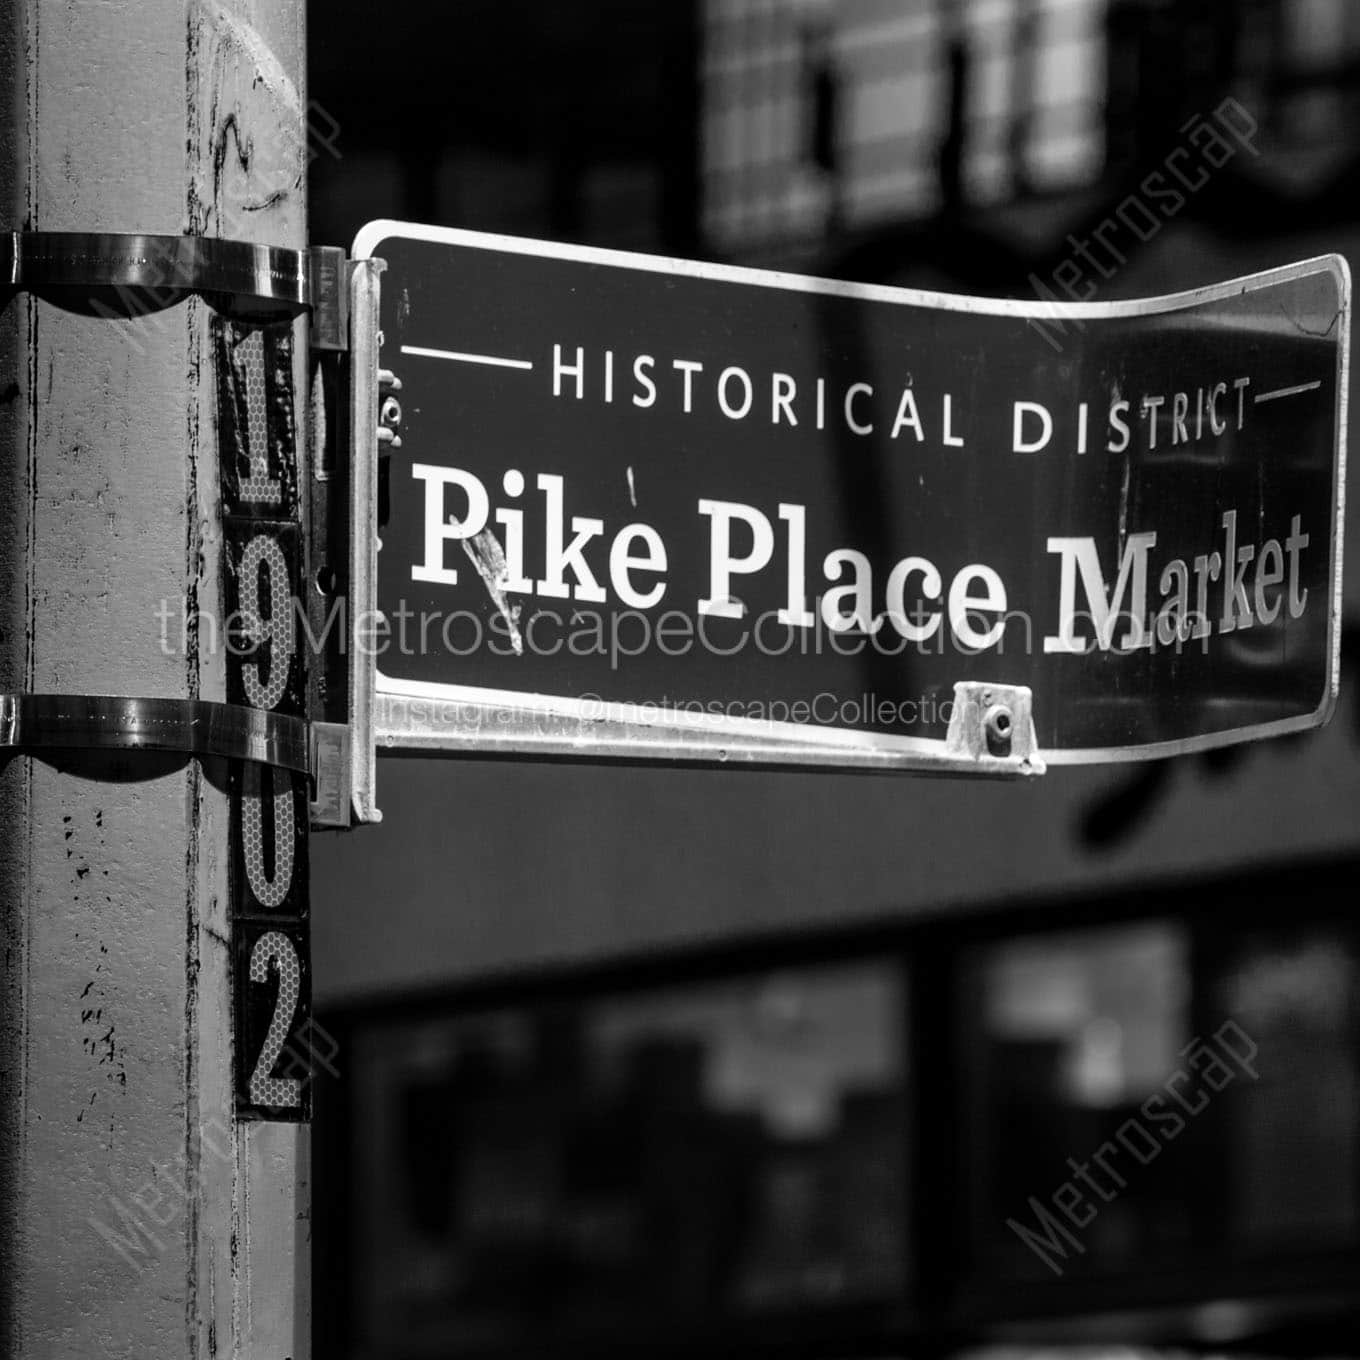 pike place market historical district sign Black & White Office Art